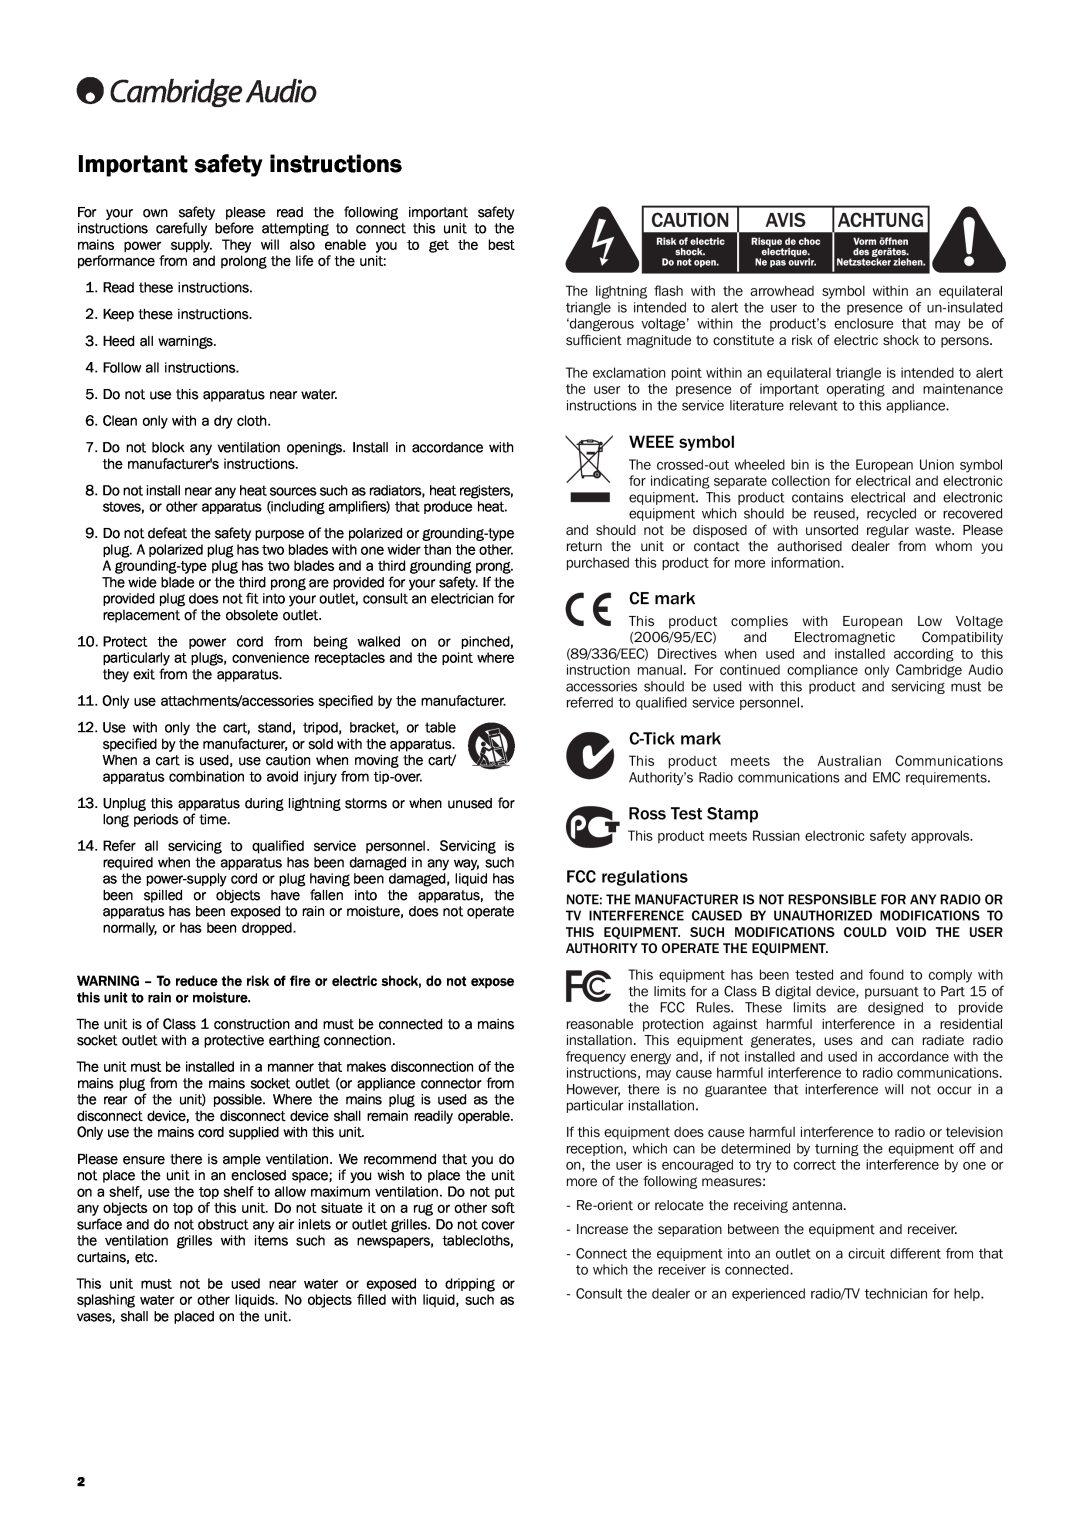 Cambridge Audio Azur 840W user manual Important safety instructions, WEEE symbol, CE mark, C-Tick mark, Ross Test Stamp 